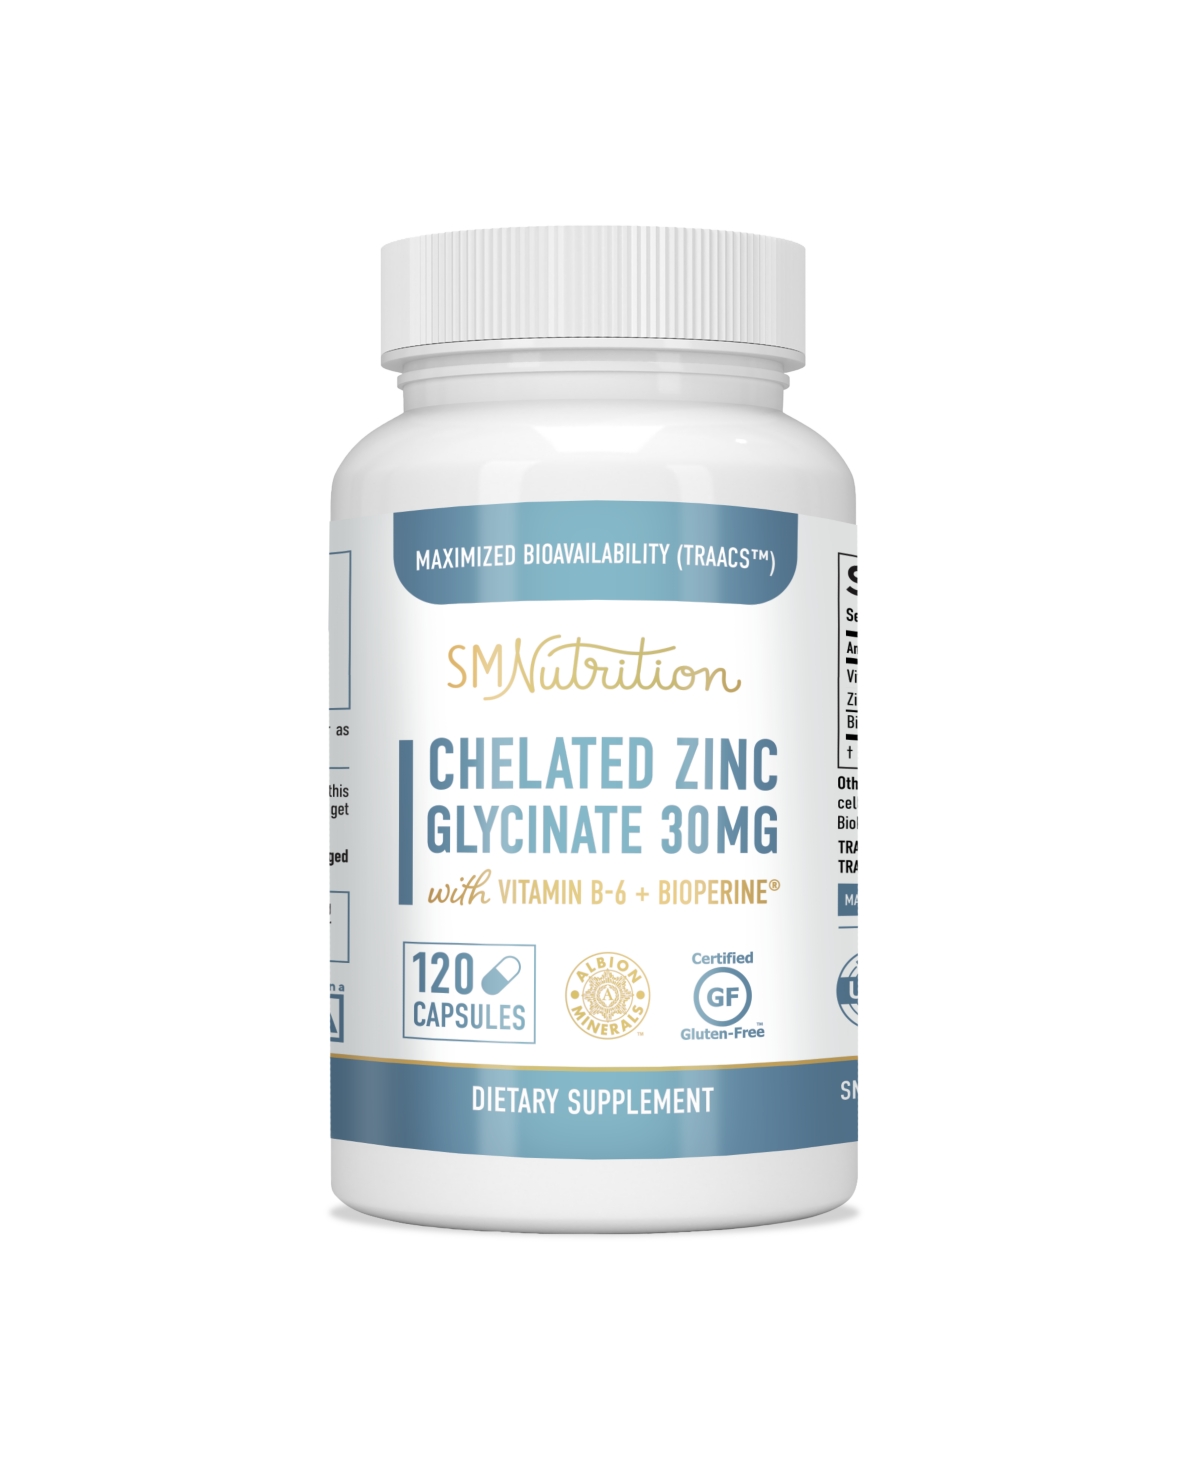 Chelated Zinc Supplements - Zinc Glycinate 30 mg (120 Capsules) Highly-Absorbable Traacs Chelated Zinc Bisglycinate, Vitamin B6 & BioPerine - Immune S